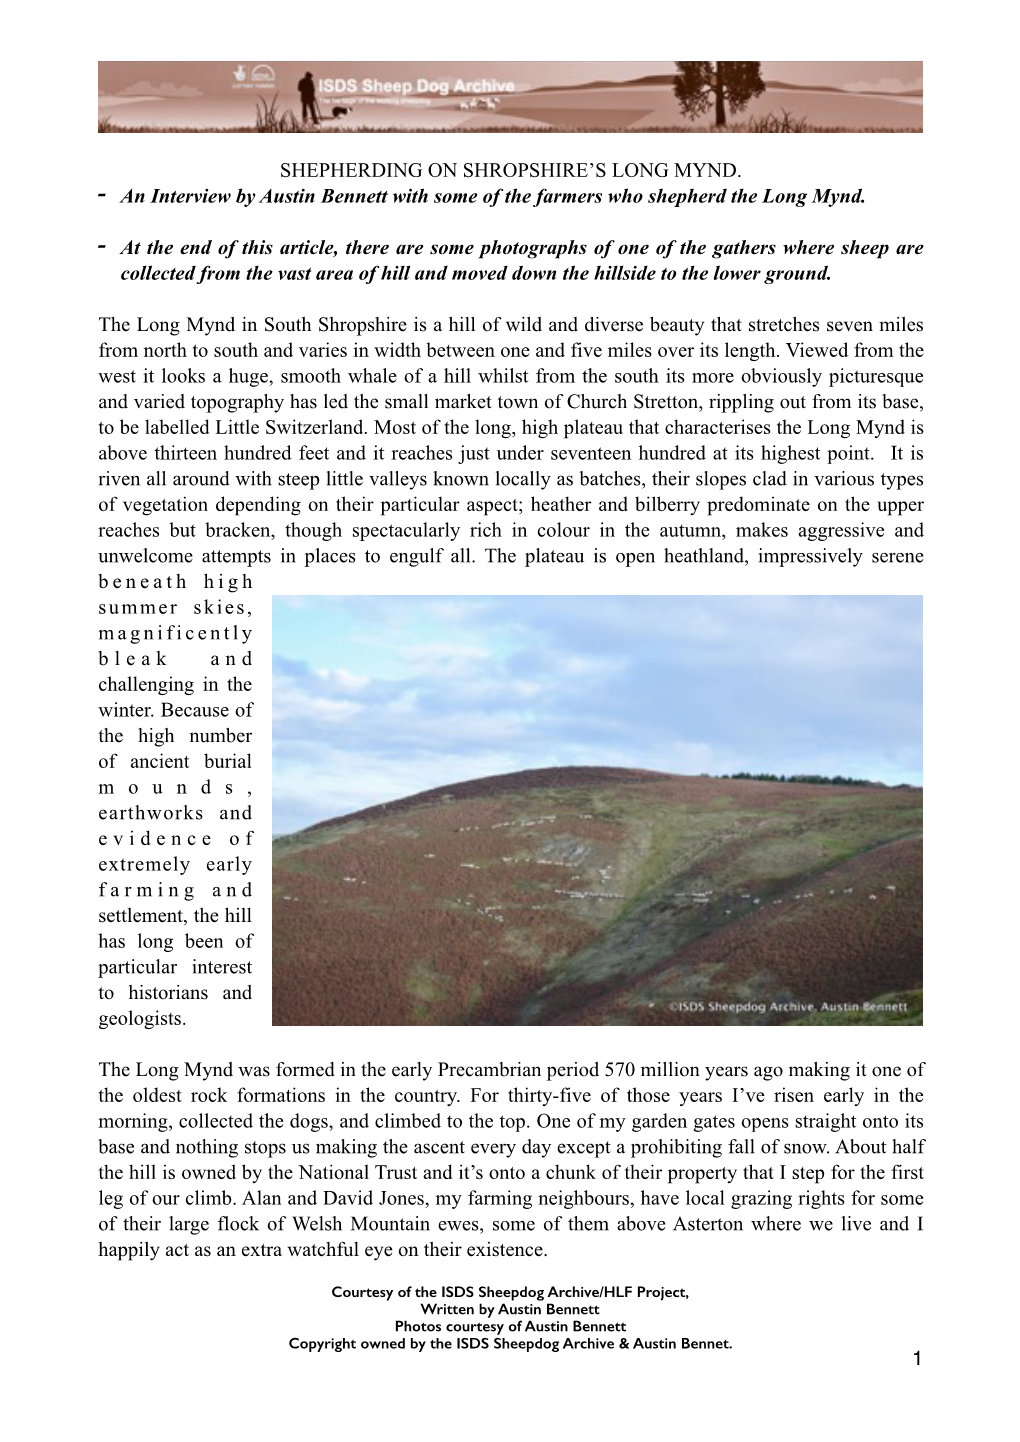 Shepherding on the Long Mynd in Shropshire.Pages